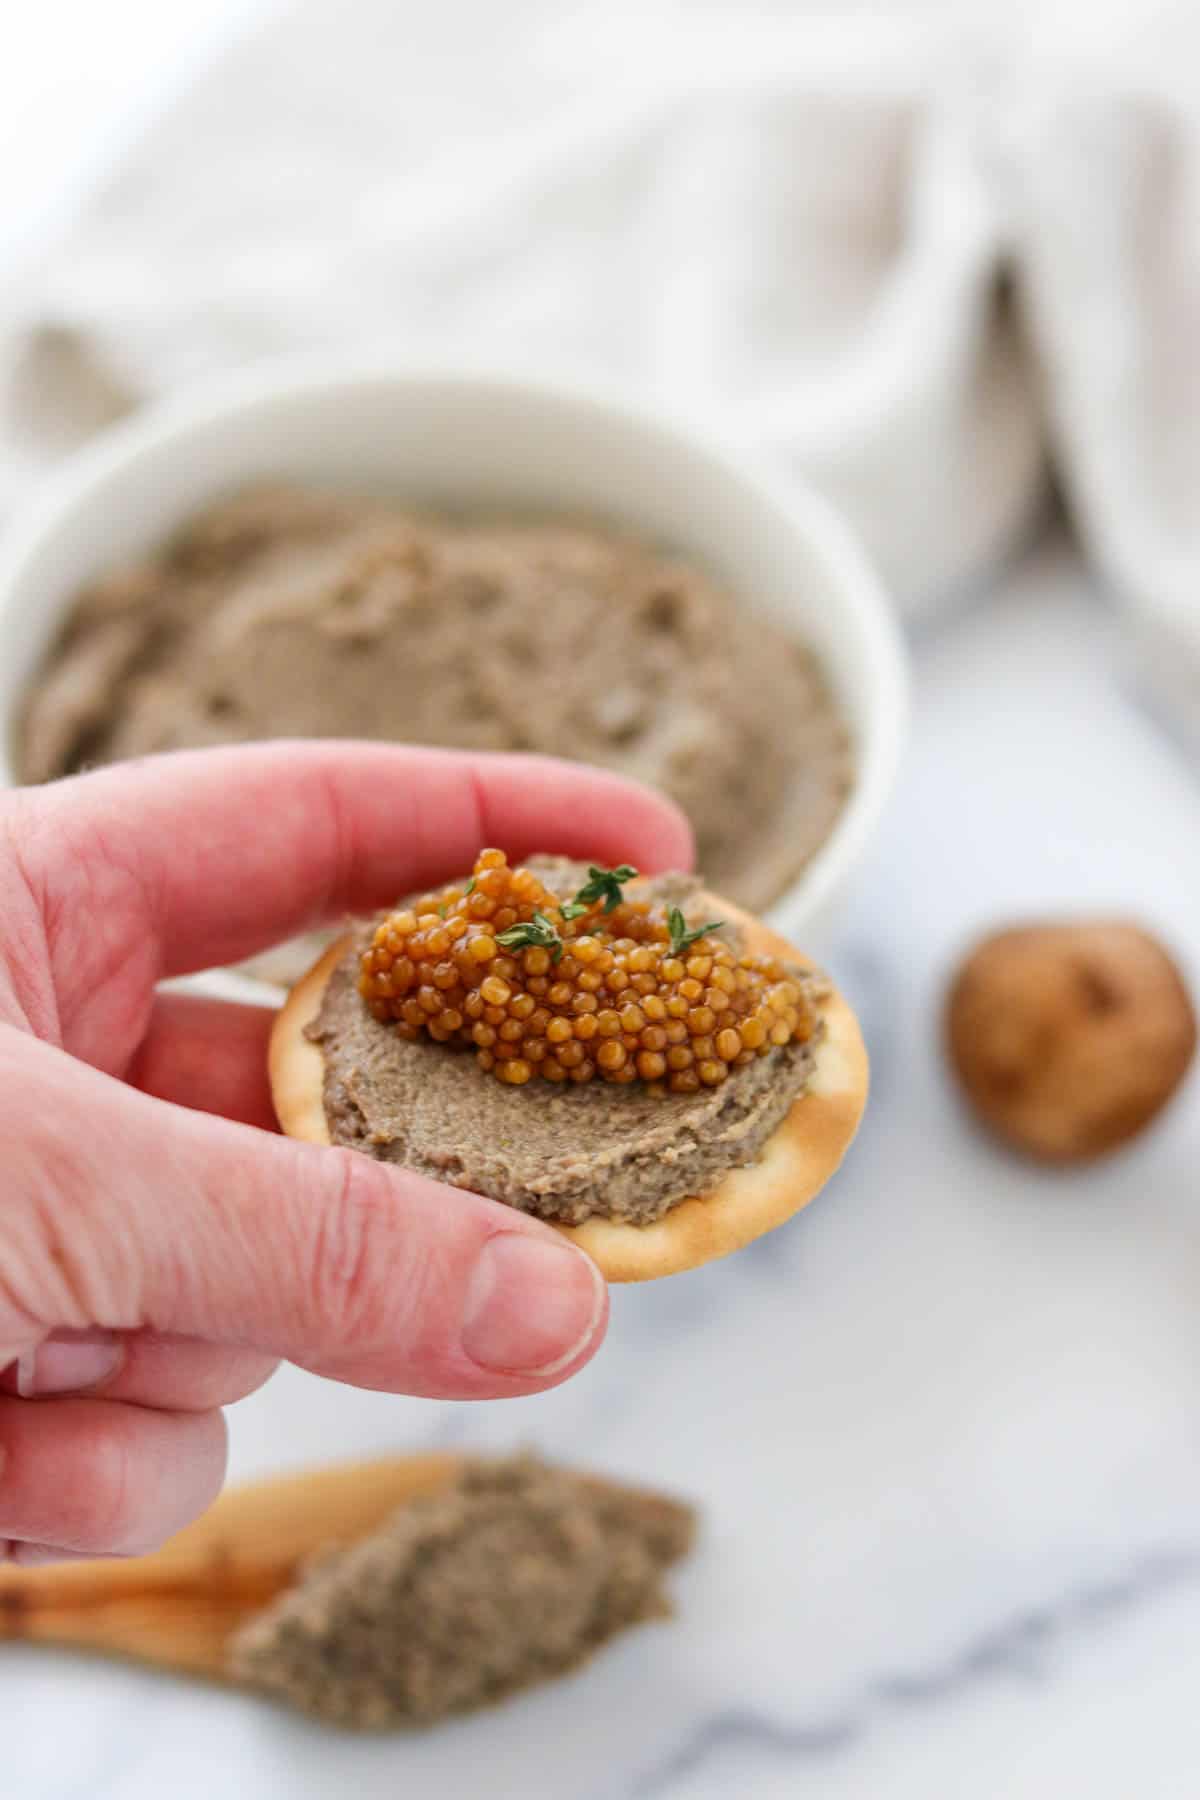 Vegetarian Mushroom Pâté on a cracker topped with pickled mustard seeds.